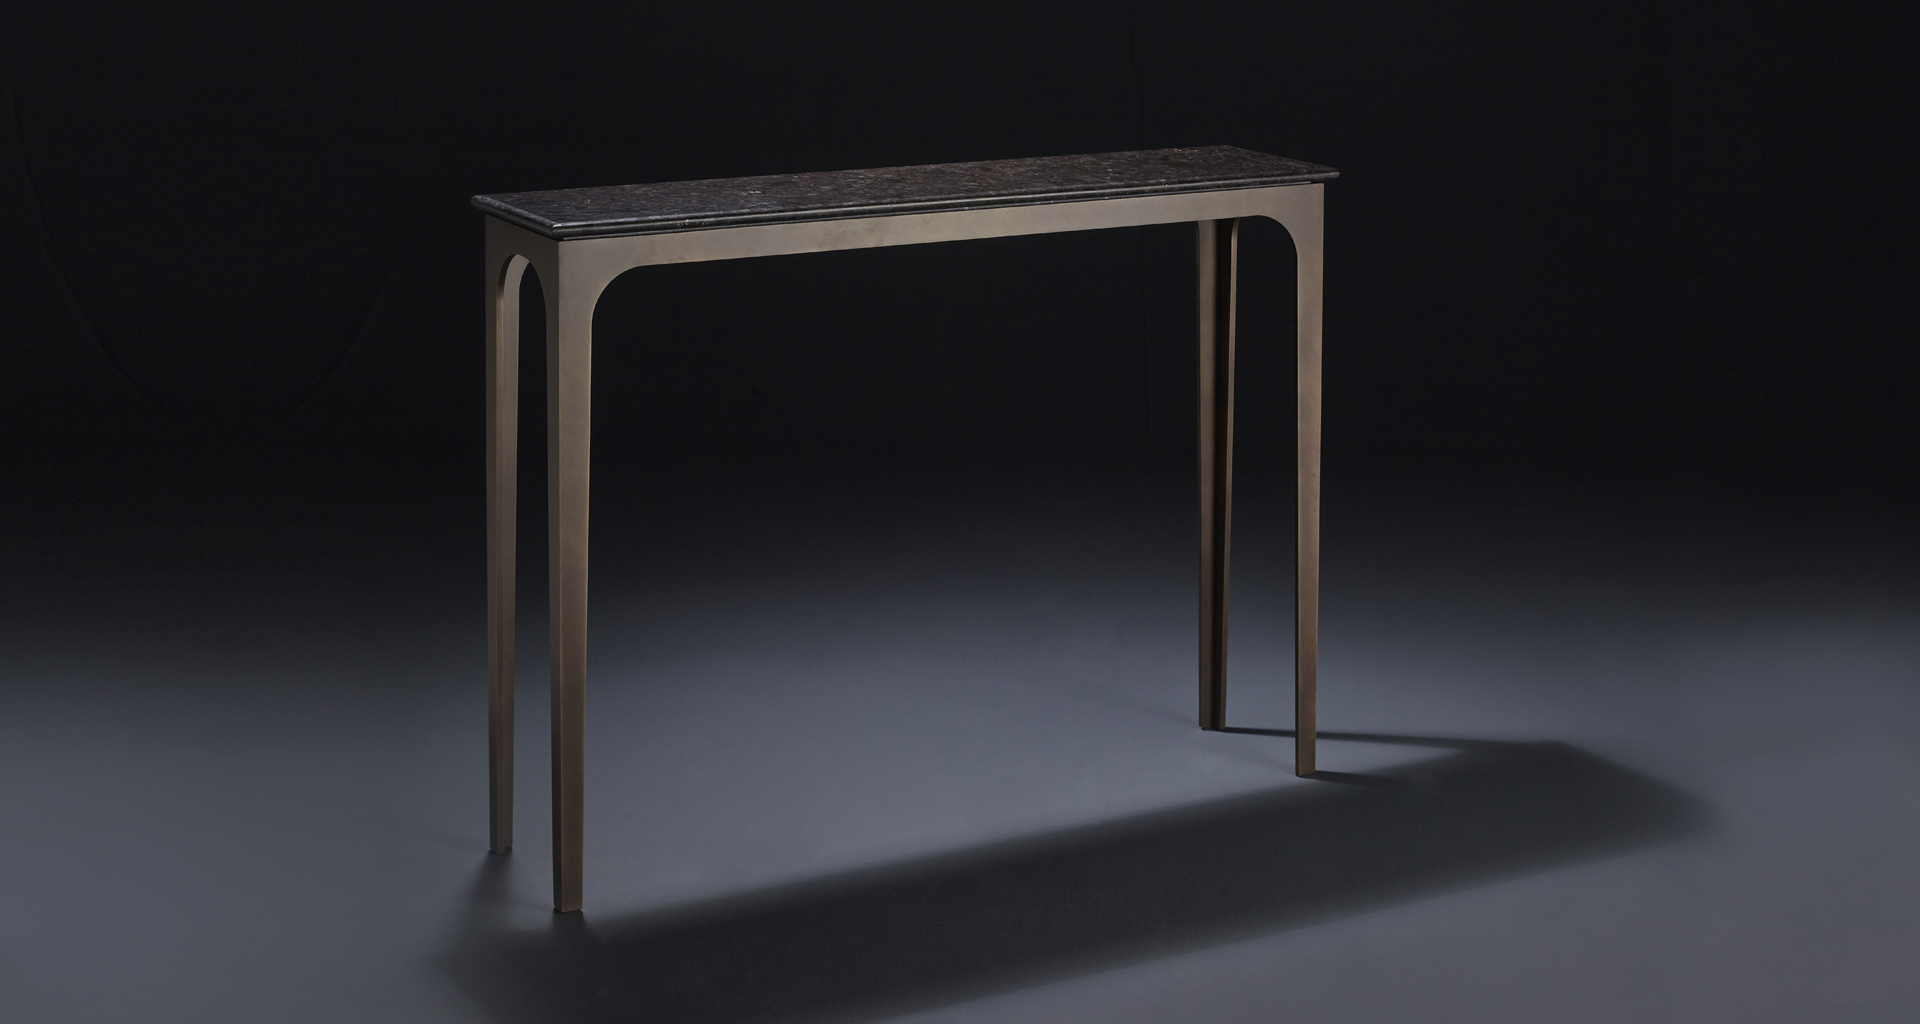 Pembridge is a metal console with marble top, from Promemoria's The London Collection | Promemoria